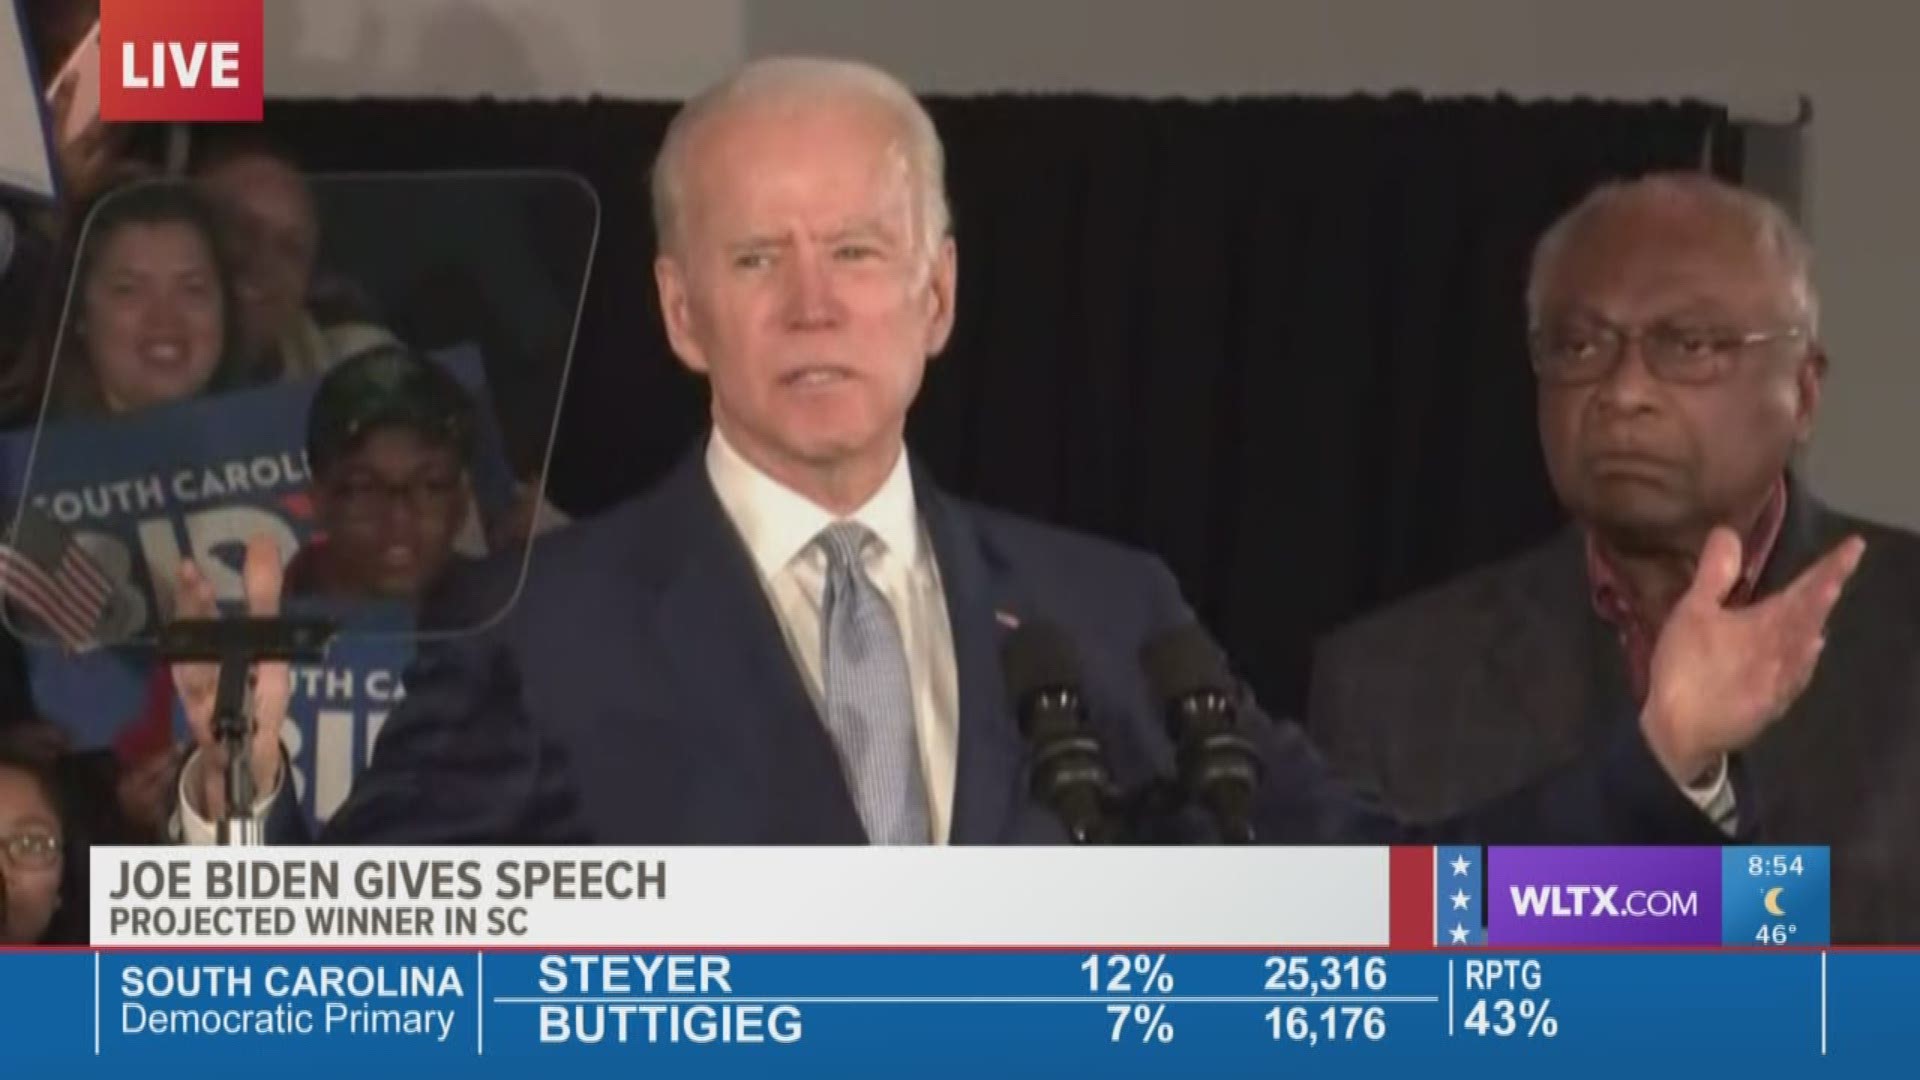 Joe Biden spoke to supporters after his big victory in the South Carolina Democratic Primary.